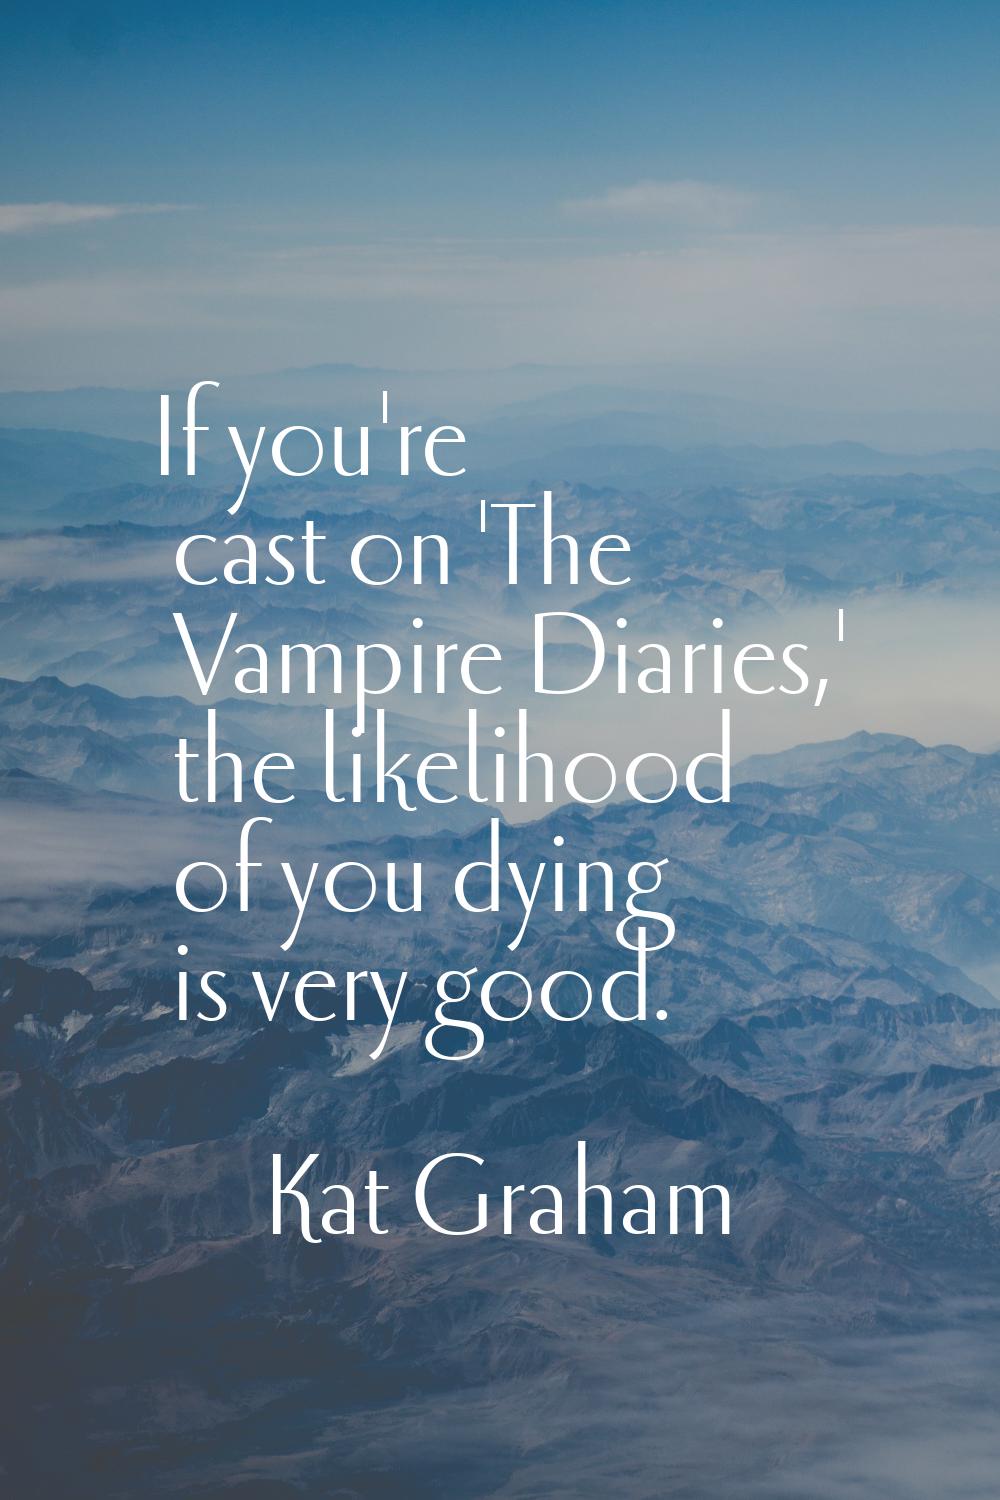 If you're cast on 'The Vampire Diaries,' the likelihood of you dying is very good.